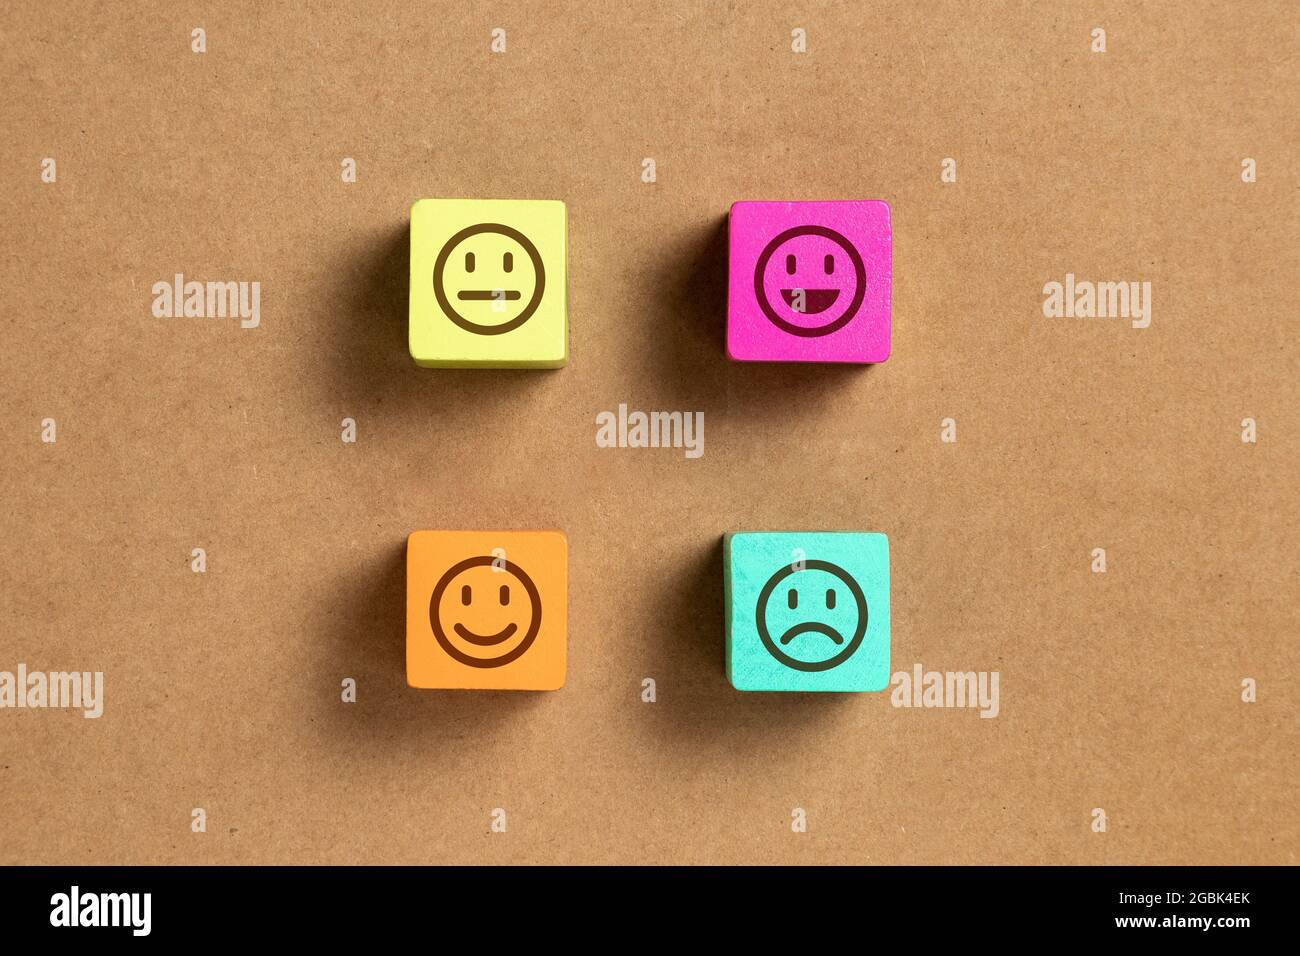 Emoticon faces in colors wooden blocks over brown wood paper. Service evaluation and satisfaction survey concepts. Angry, neutral, good mood and happy Stock Photo